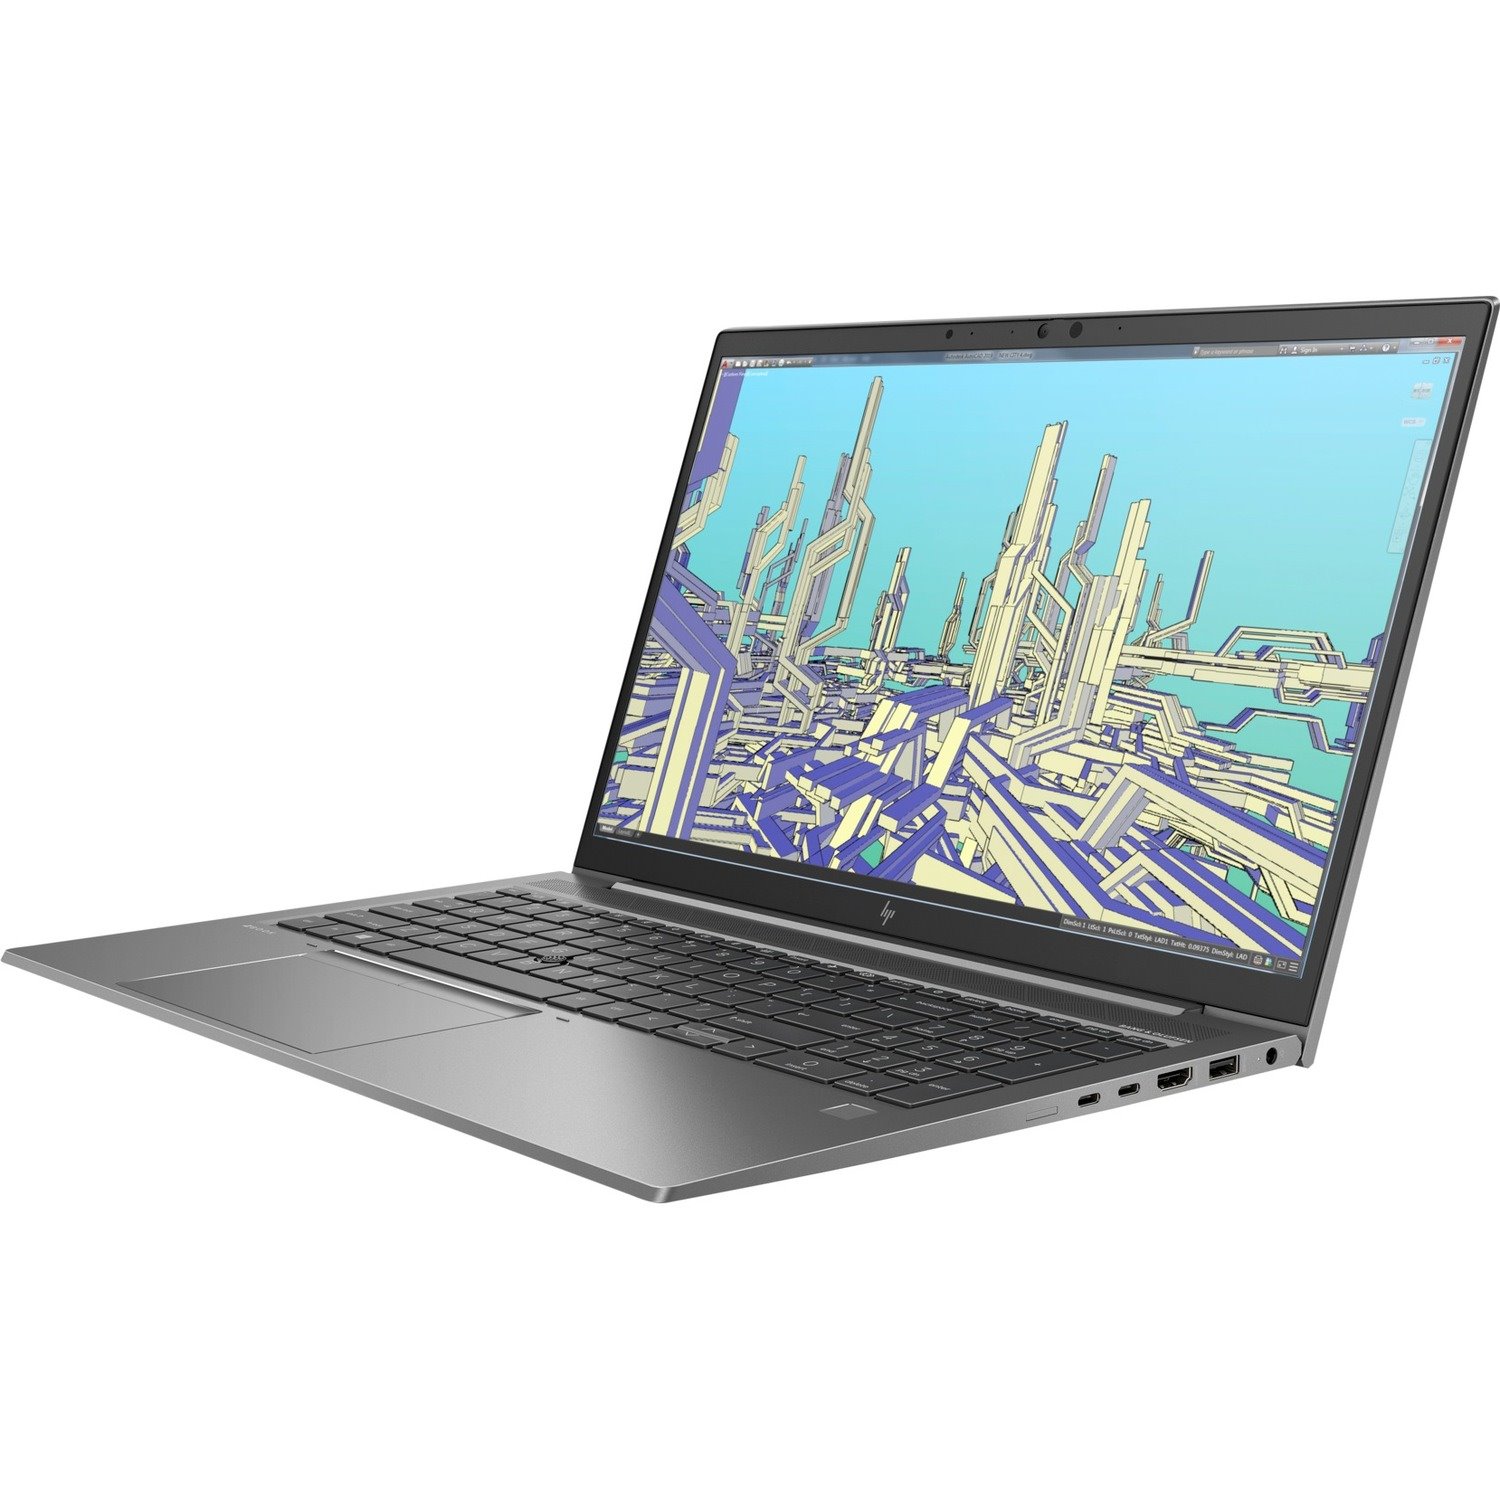 HP ZBook Firefly 15 G8 39.6 cm (15.6") Mobile Workstation - Full HD - 1920 x 1080 - Intel Core i7 11th Gen i7-1165G7 Quad-core (4 Core) 2.80 GHz - 32 GB Total RAM - 512 GB SSD